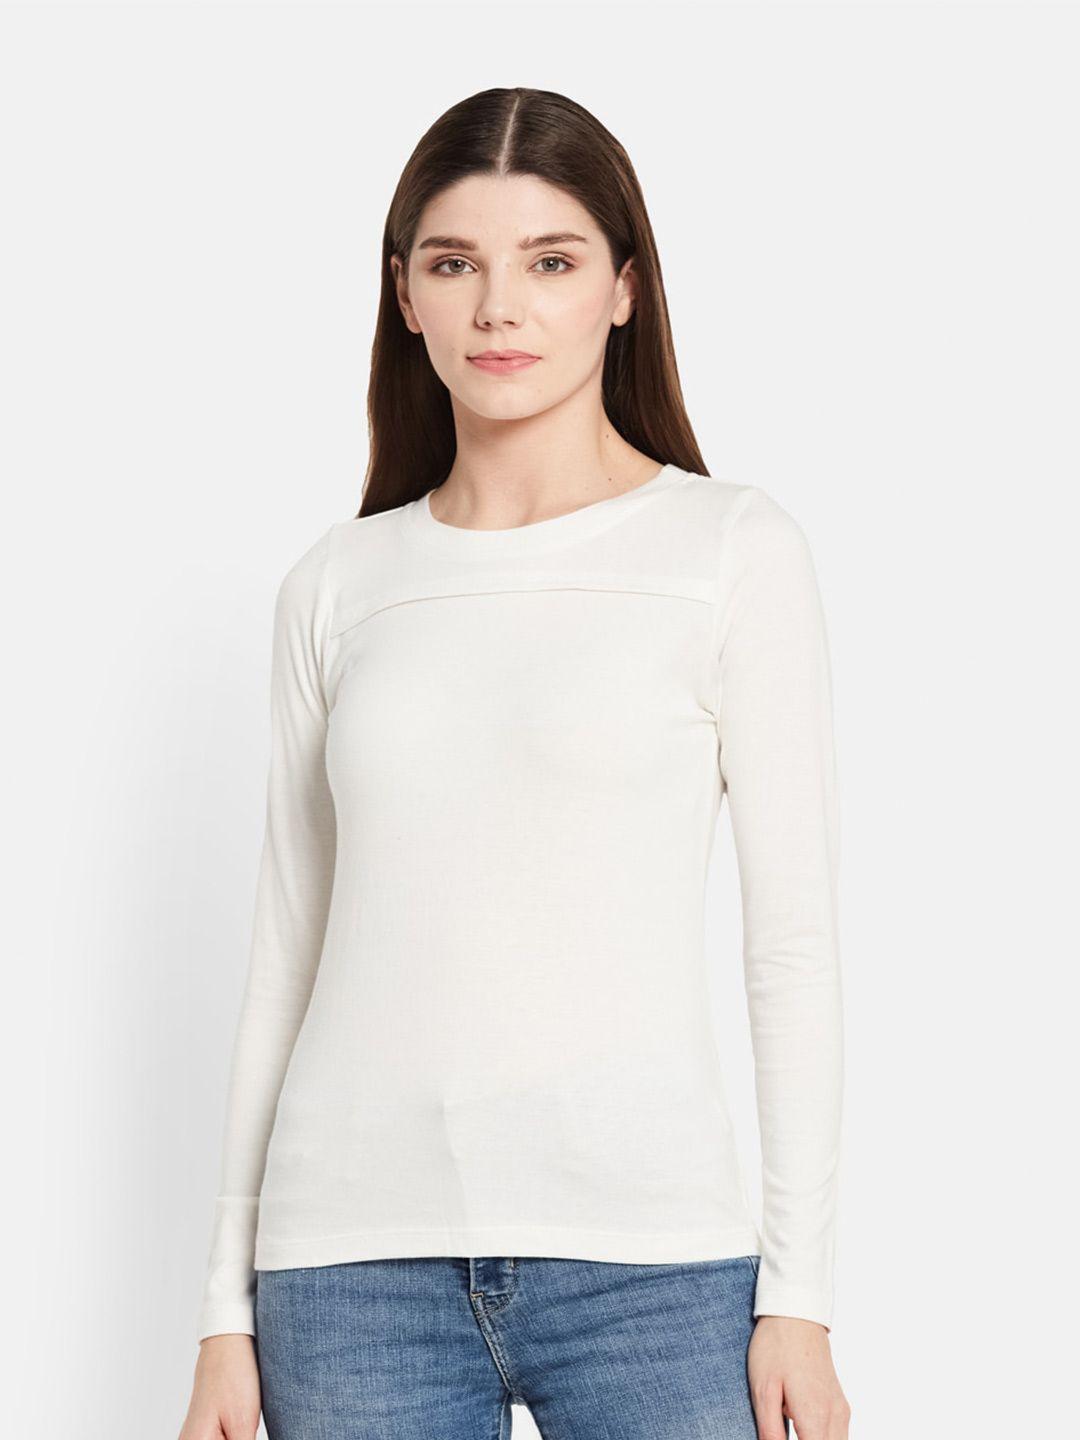 unmade round neck long sleeve top